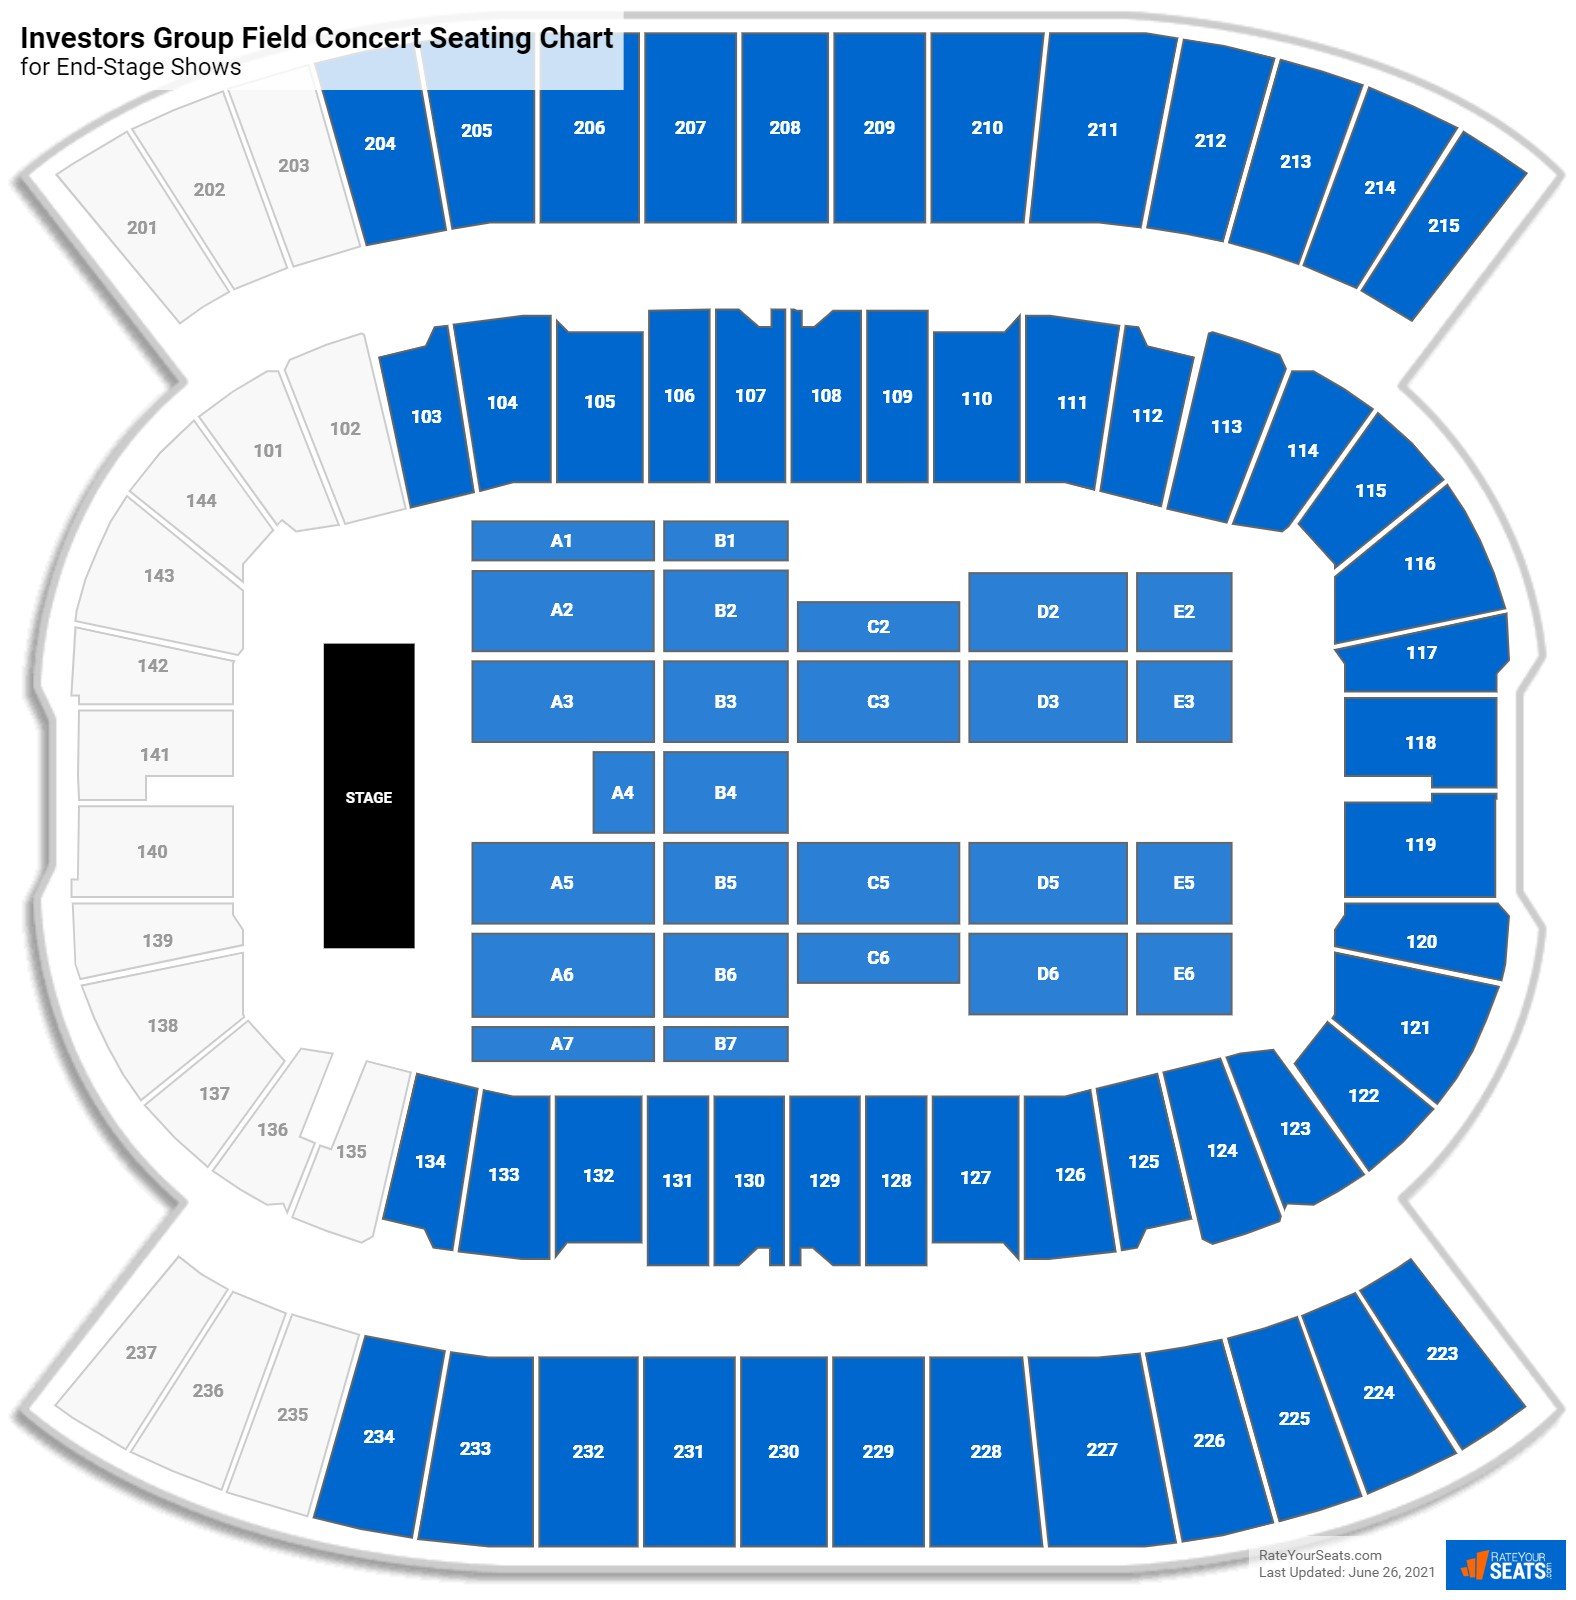 Investors Group Field Concert Seating Chart